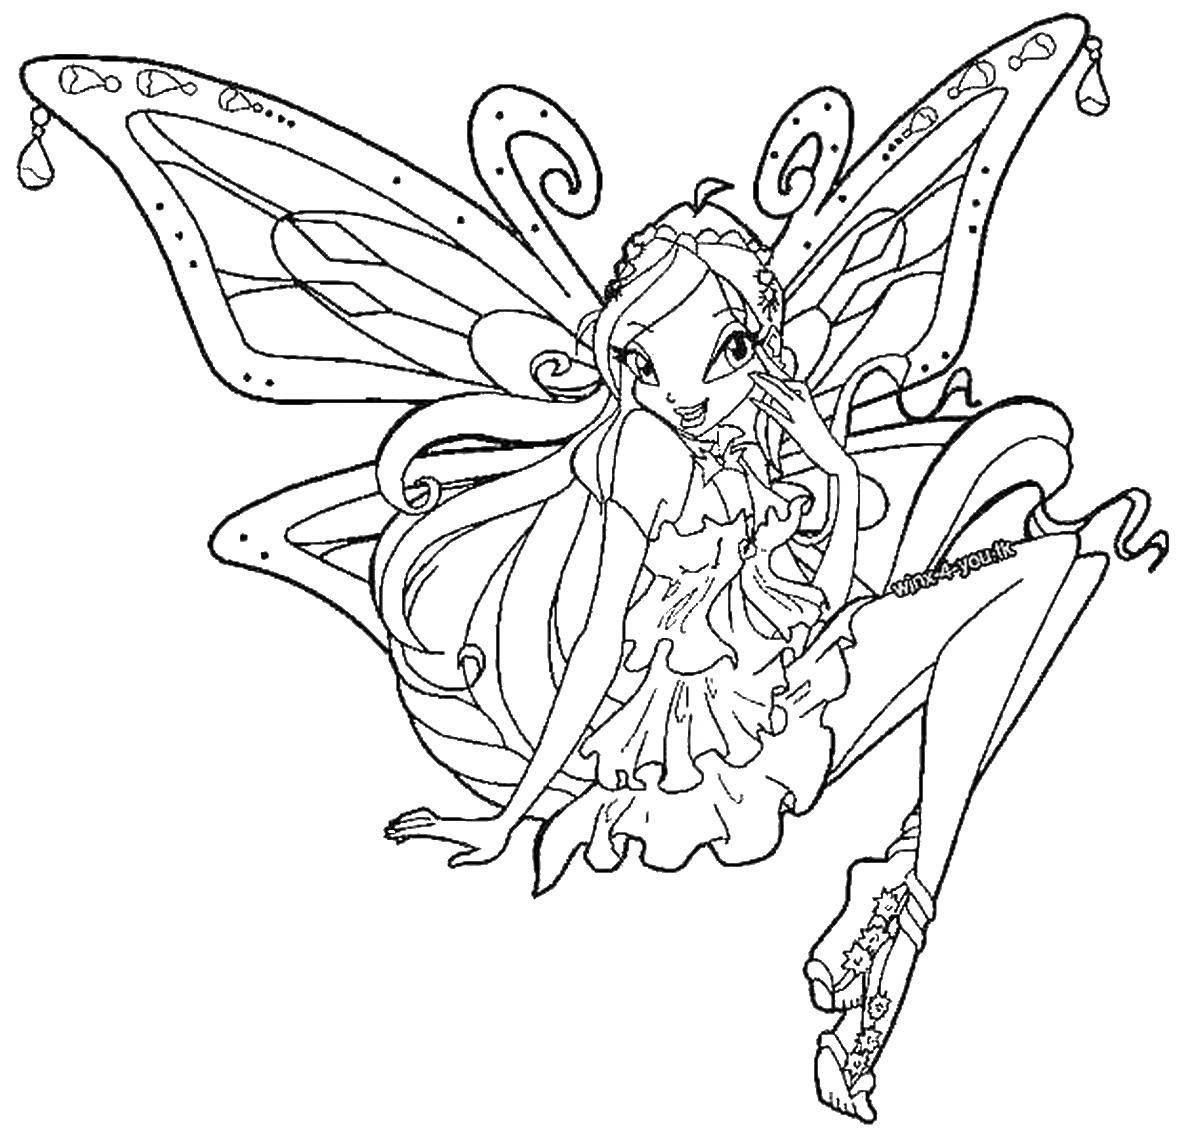 Awesome winx stella coloring page